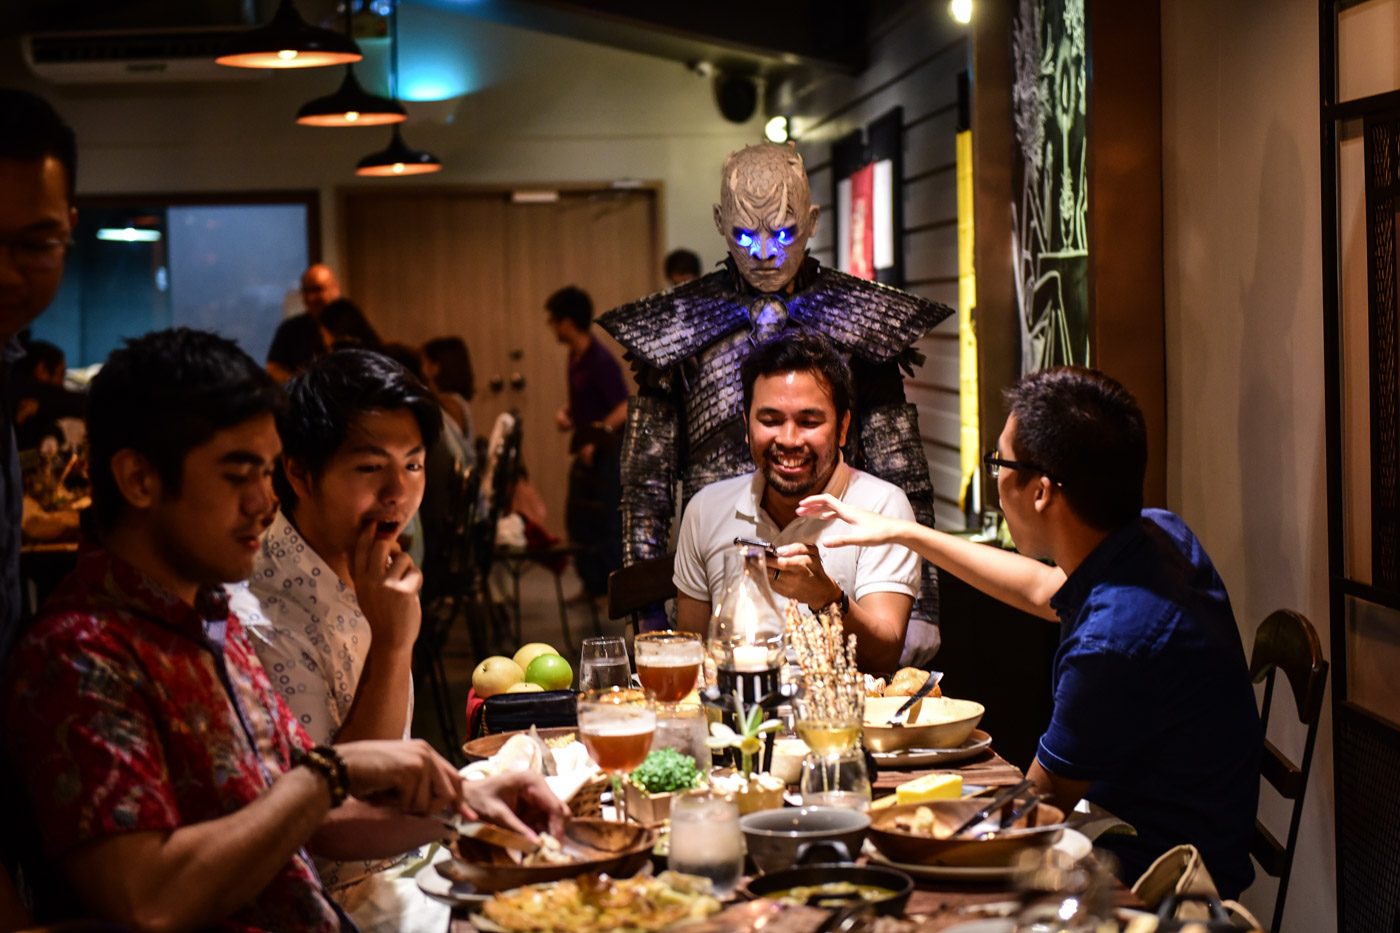 IN PHOTOS: This is what a real-life ‘Game of Thrones’ feast looks like